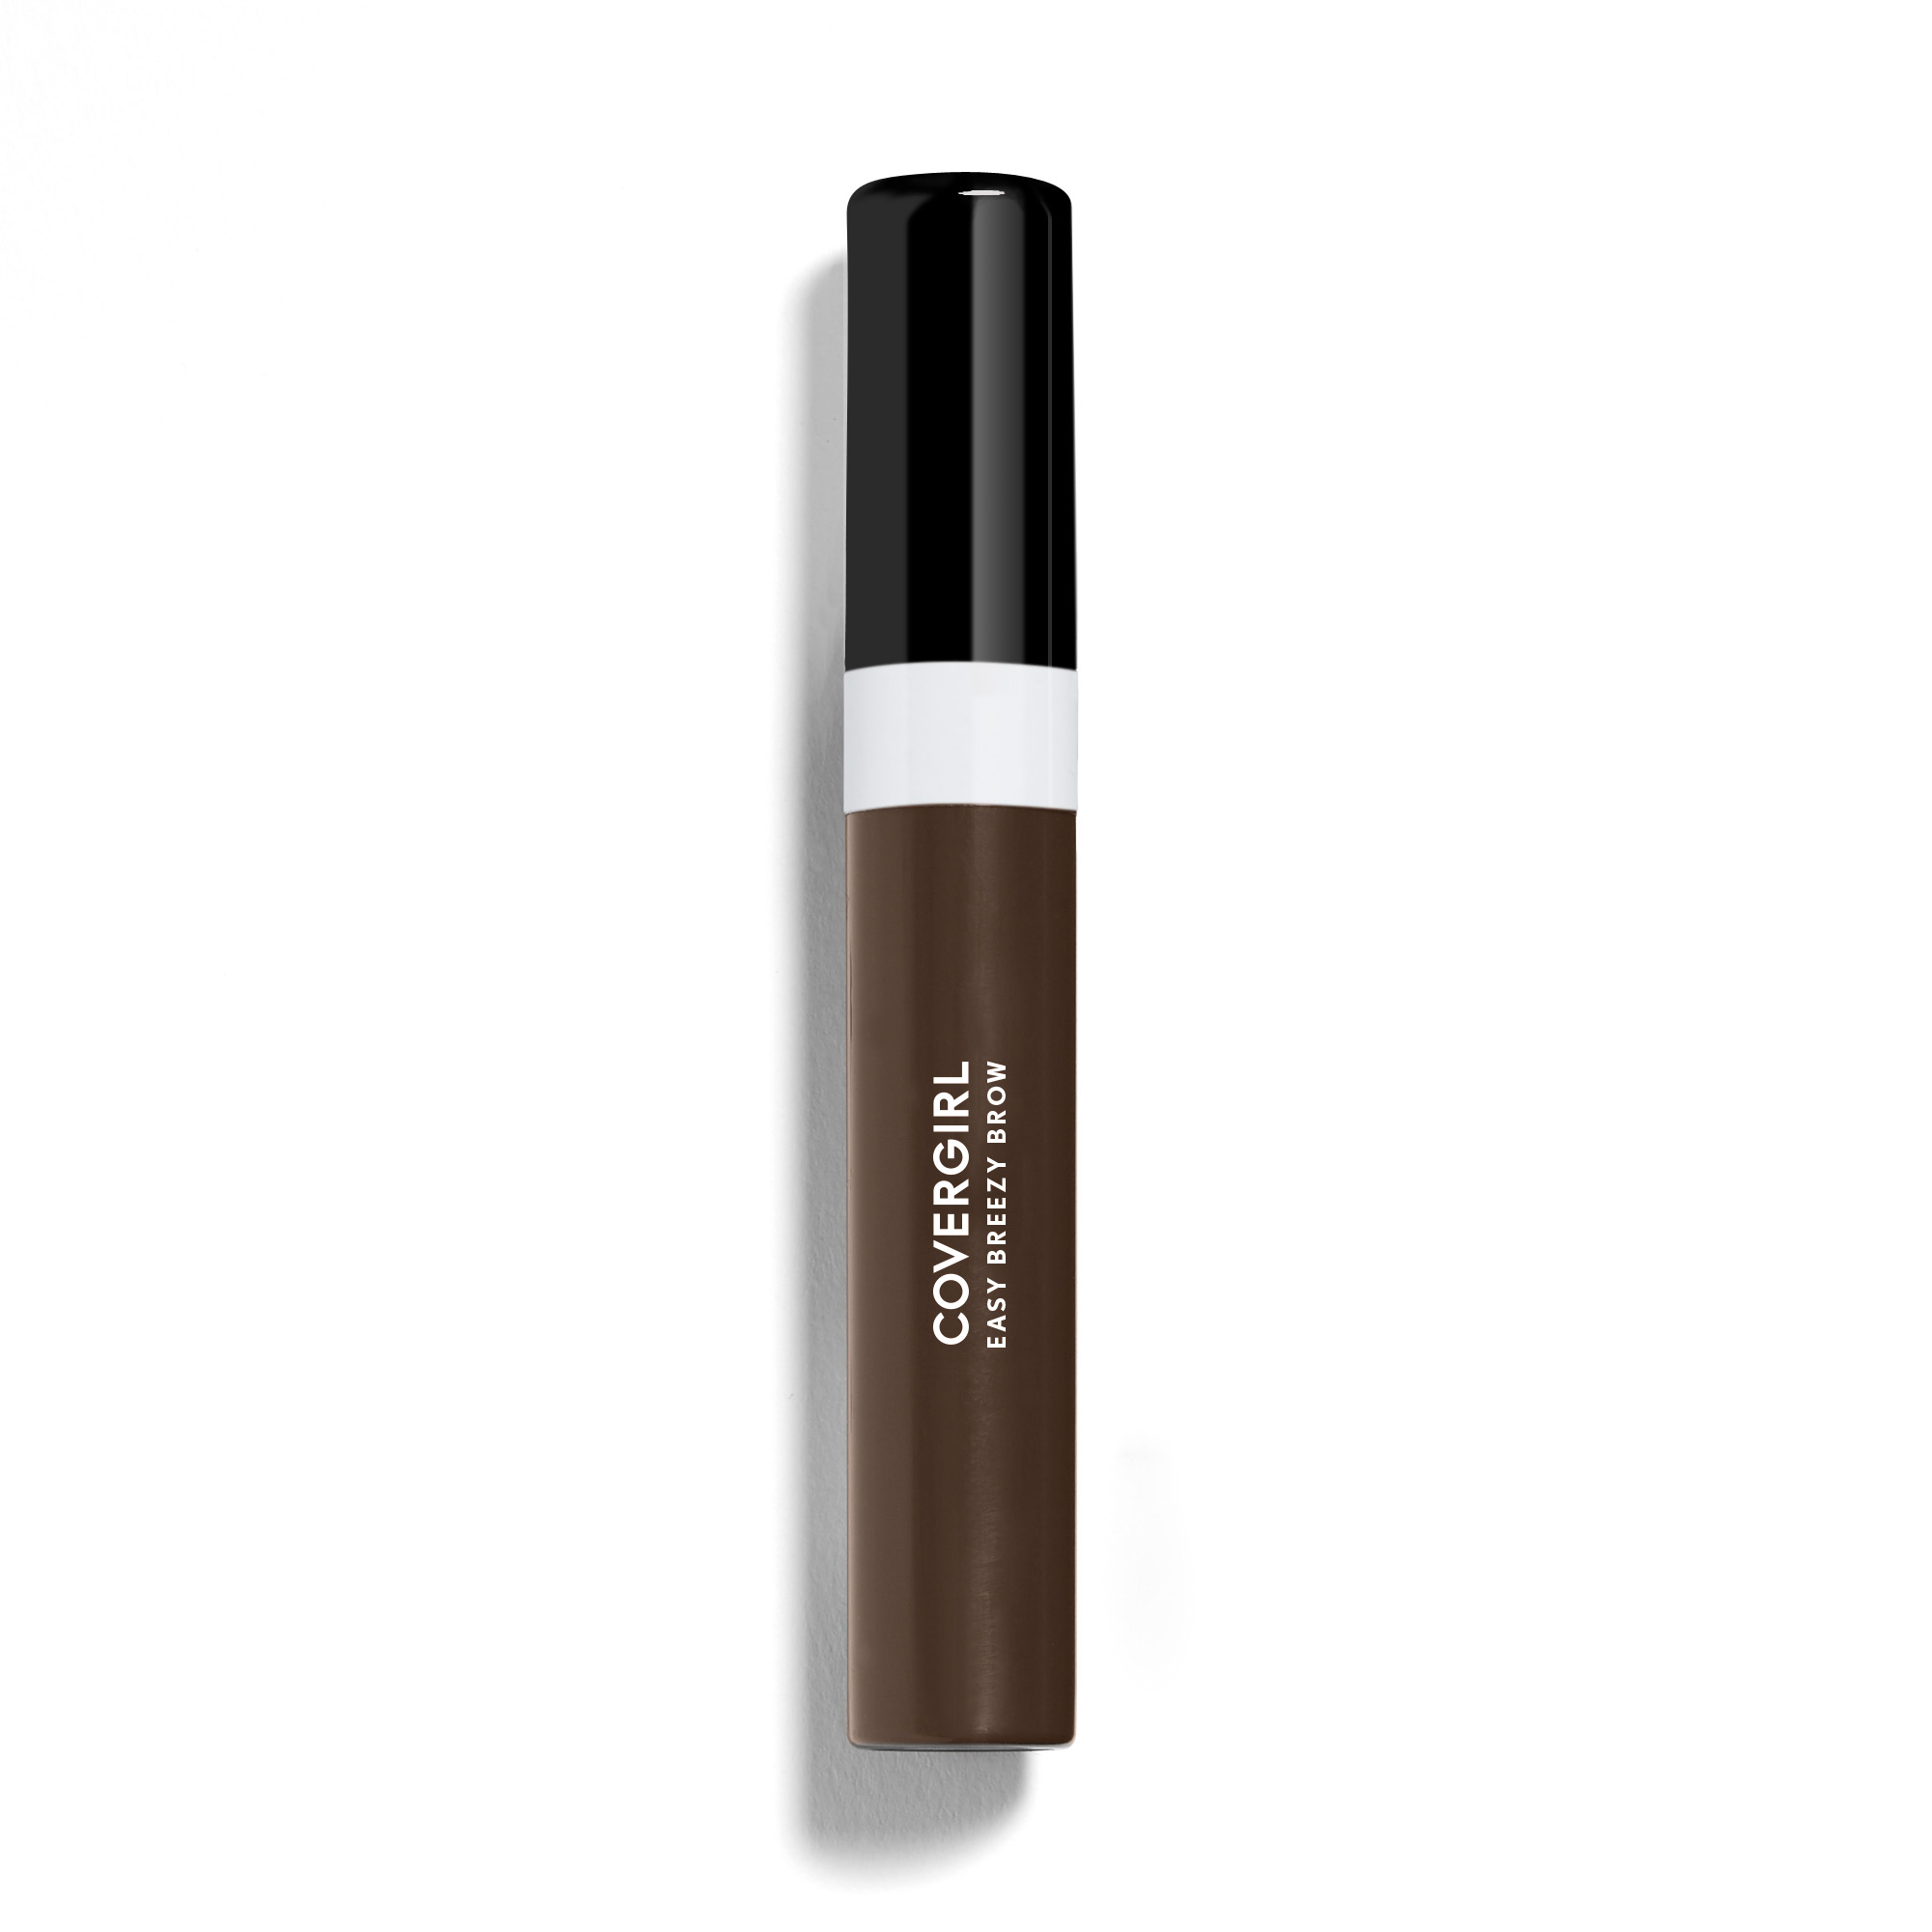 COVERGIRL Brow Shape & Define Eyebrow Mascara, 605 Rich Brown - image 1 of 3